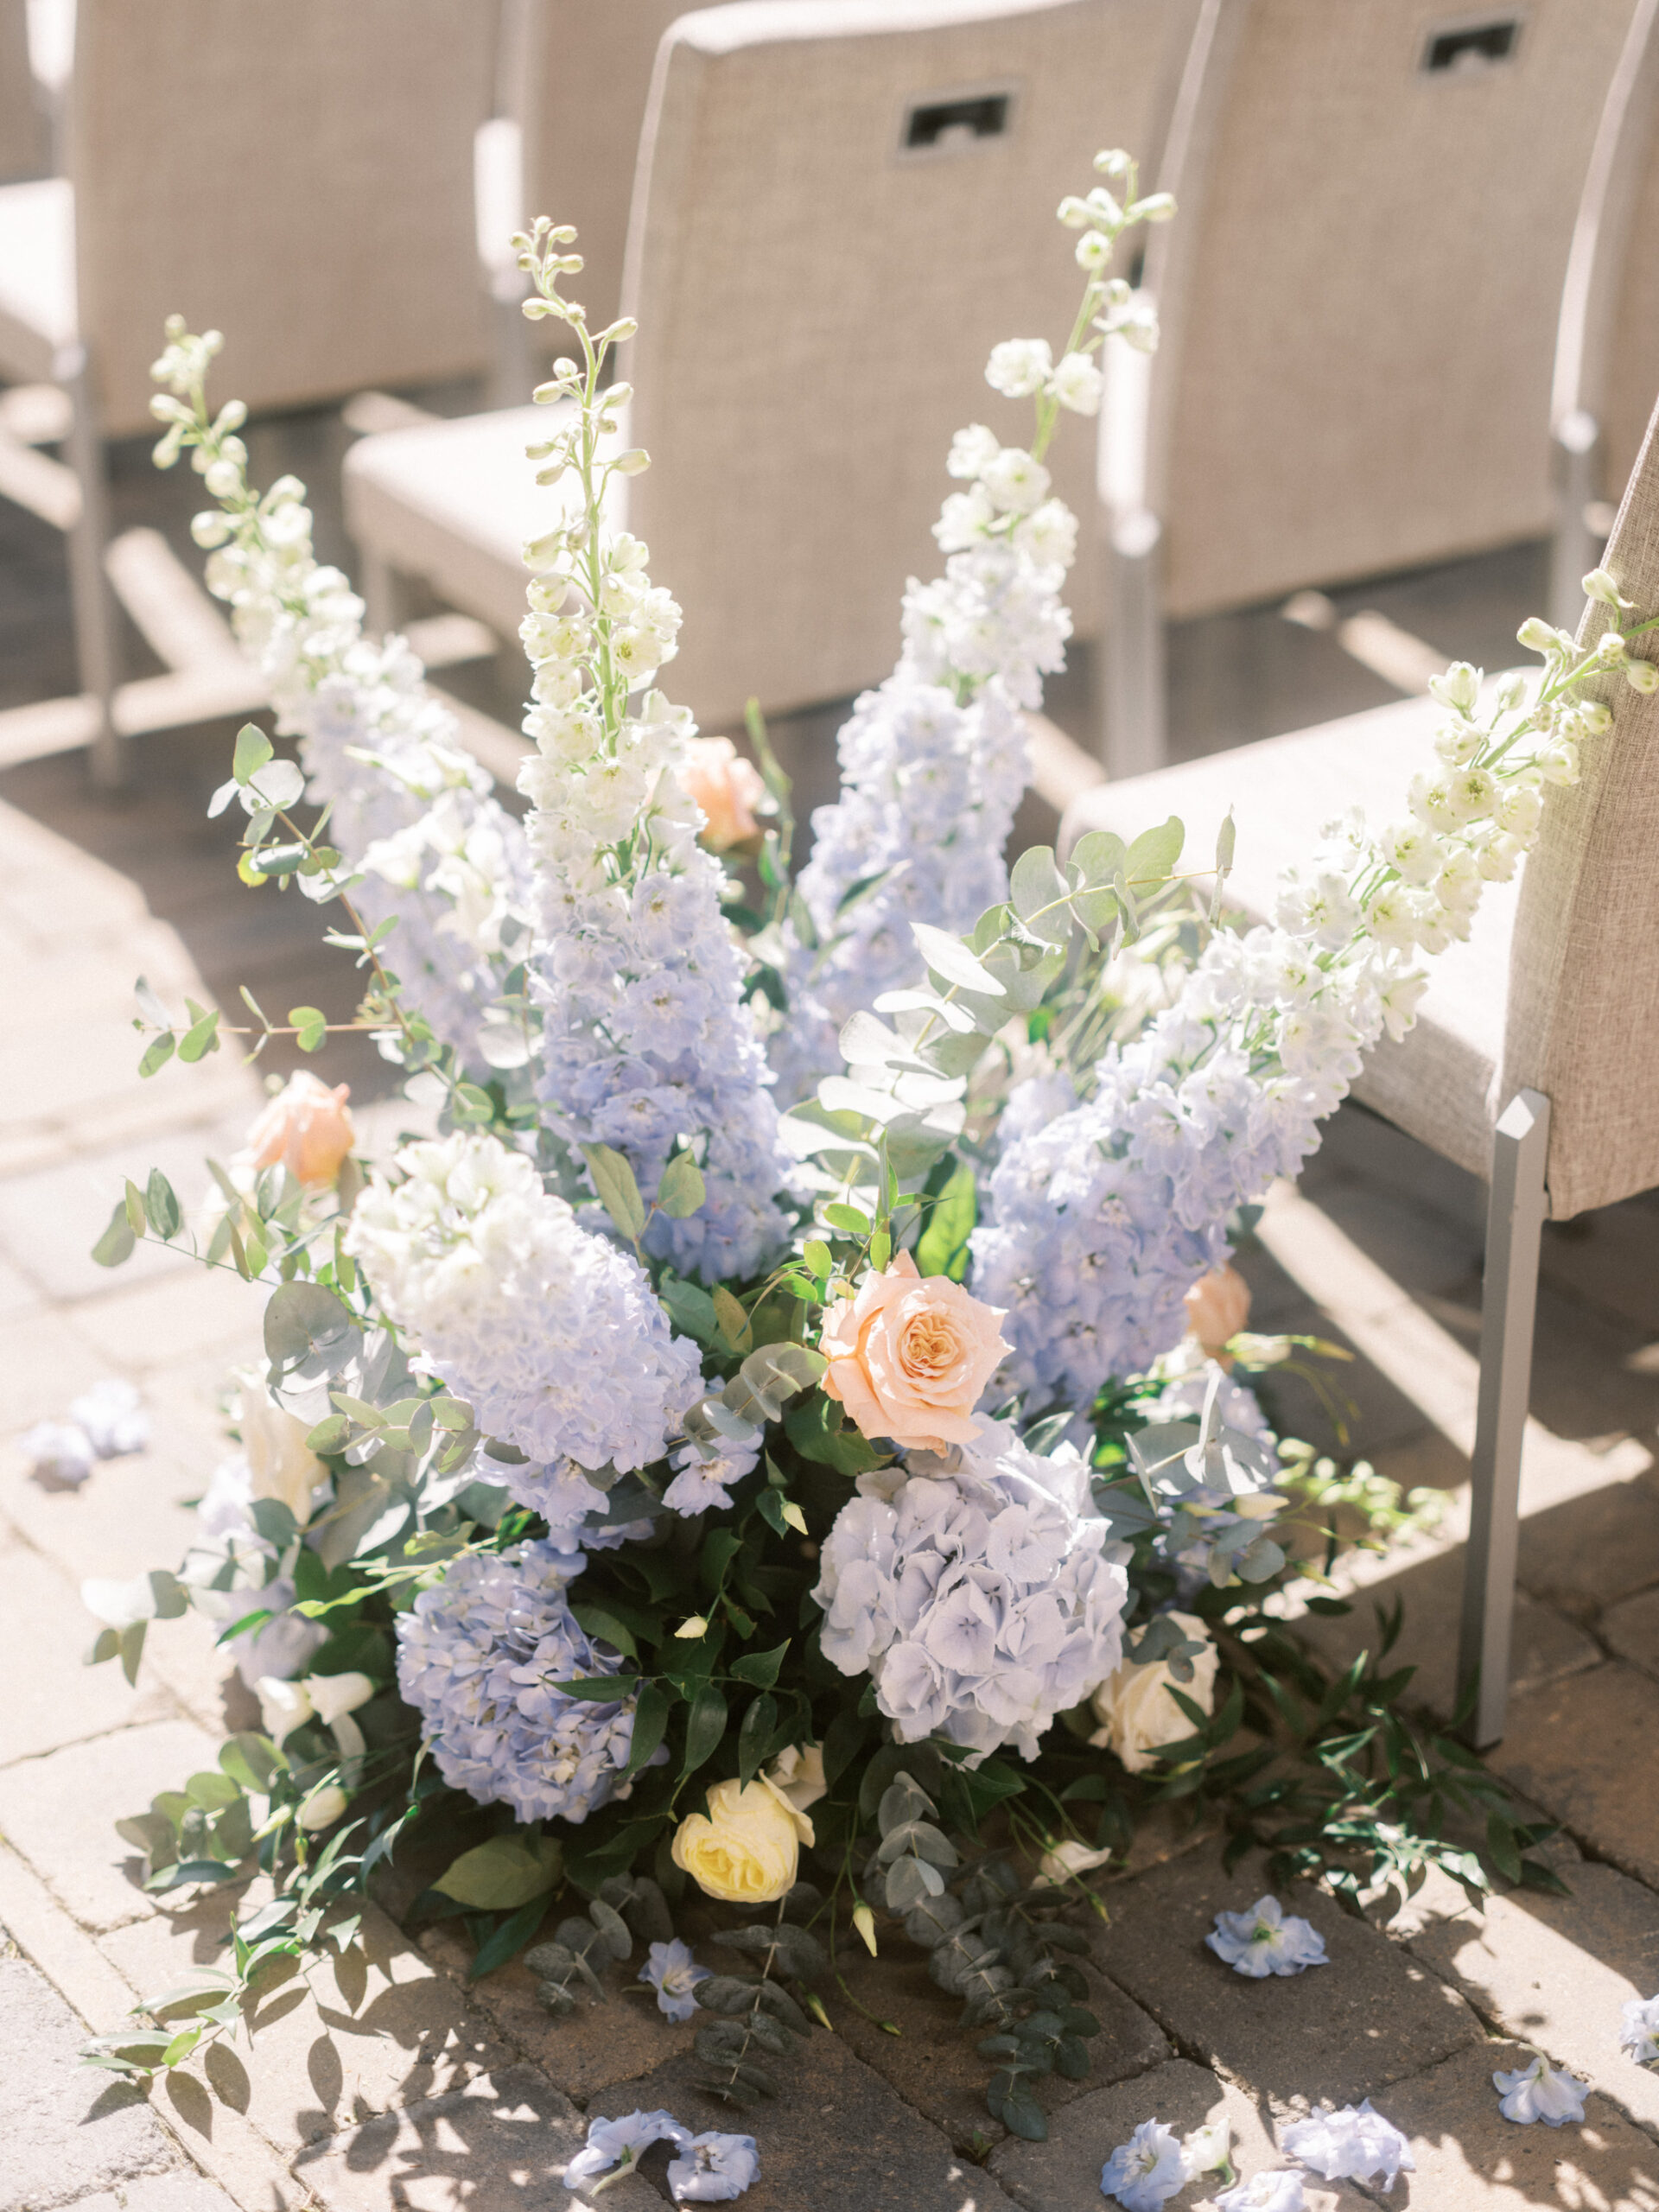 French Blue Parisian Wedding Inspiration, wedding ceremony hydrangeas roses, blue tapered candles wedding, gold cutlery, head table florals, bridal table flowers, hydrangea centrepieces, tall hydrangea centrepiece, blue ceremony arch, hydrangea ceremony arch, french wedding, light blue wedding, dusty blue florals, anemones, wedding floral inspo, blue wedding hydrangeas, nicole sarah wedding photography, gold trim wedding plates